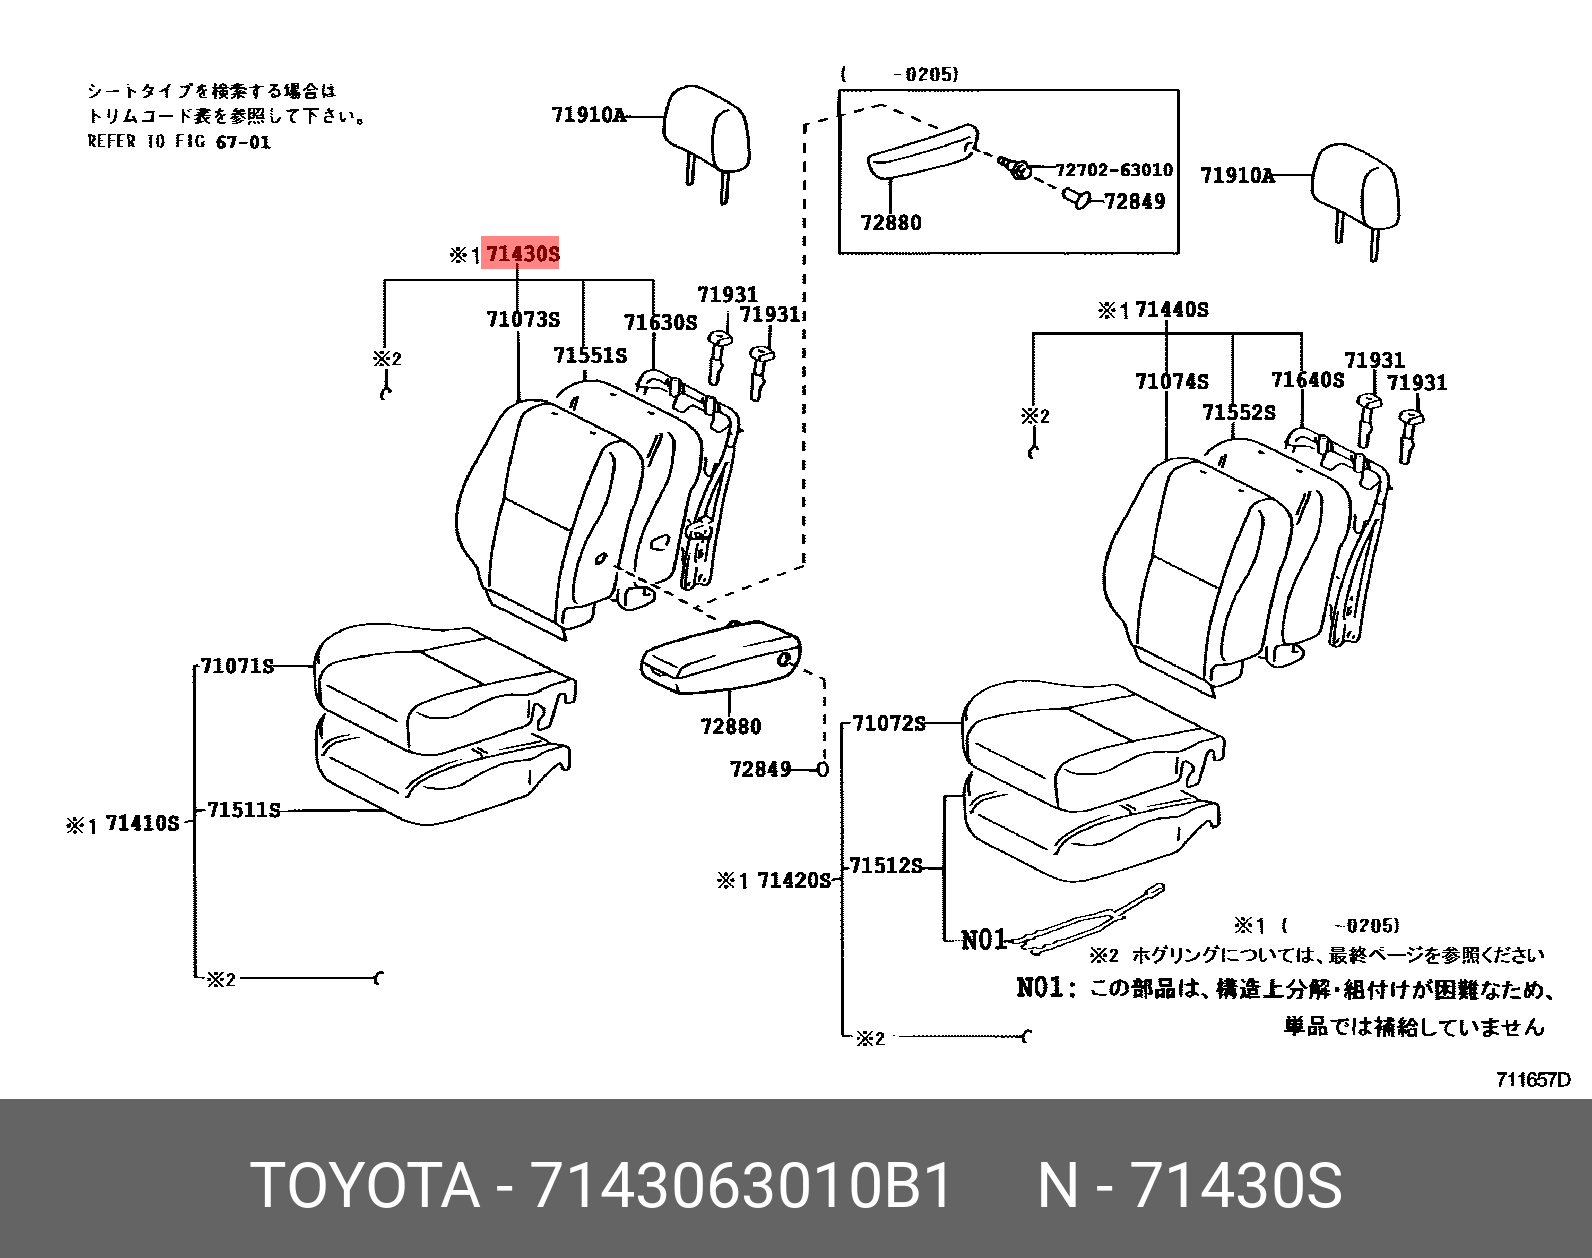 OPA 200004 - 200504, BACK ASSY, FRONT SEAT, RH(FOR SEPARATE TYPE)